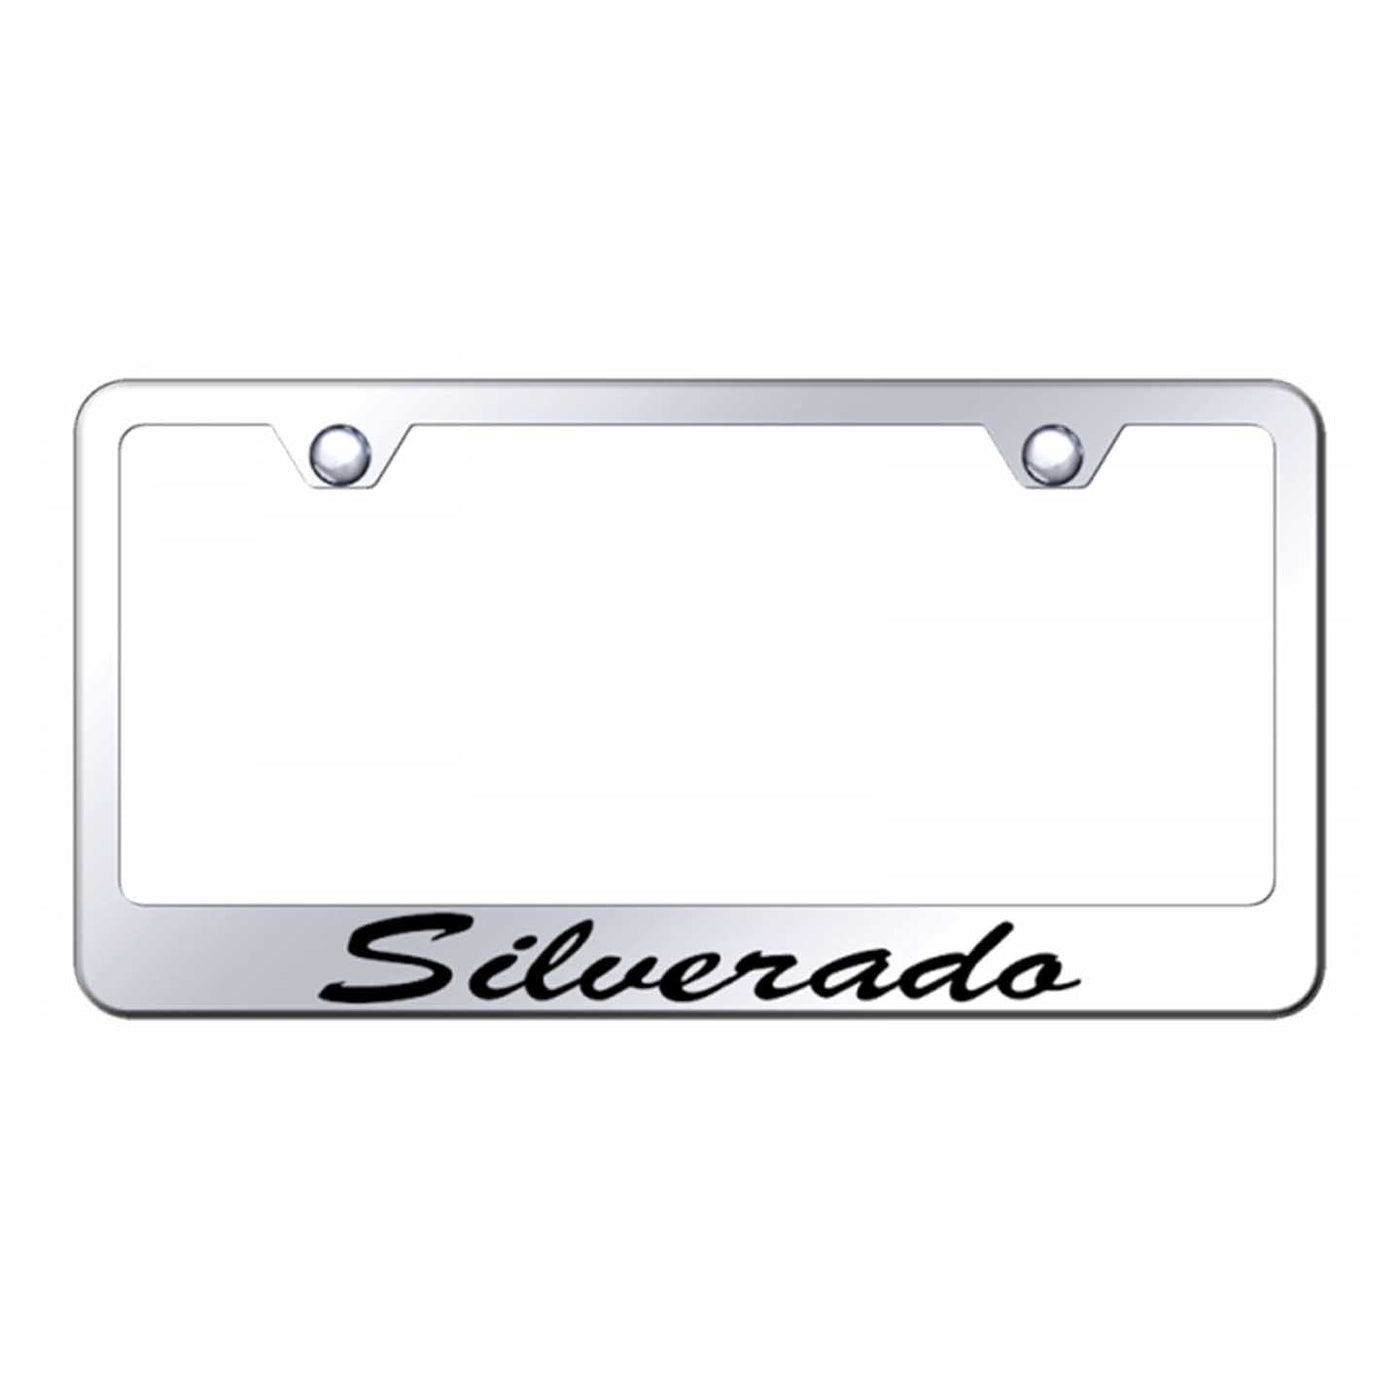 Silverado Script Stainless Steel Frame - Etched Mirrored